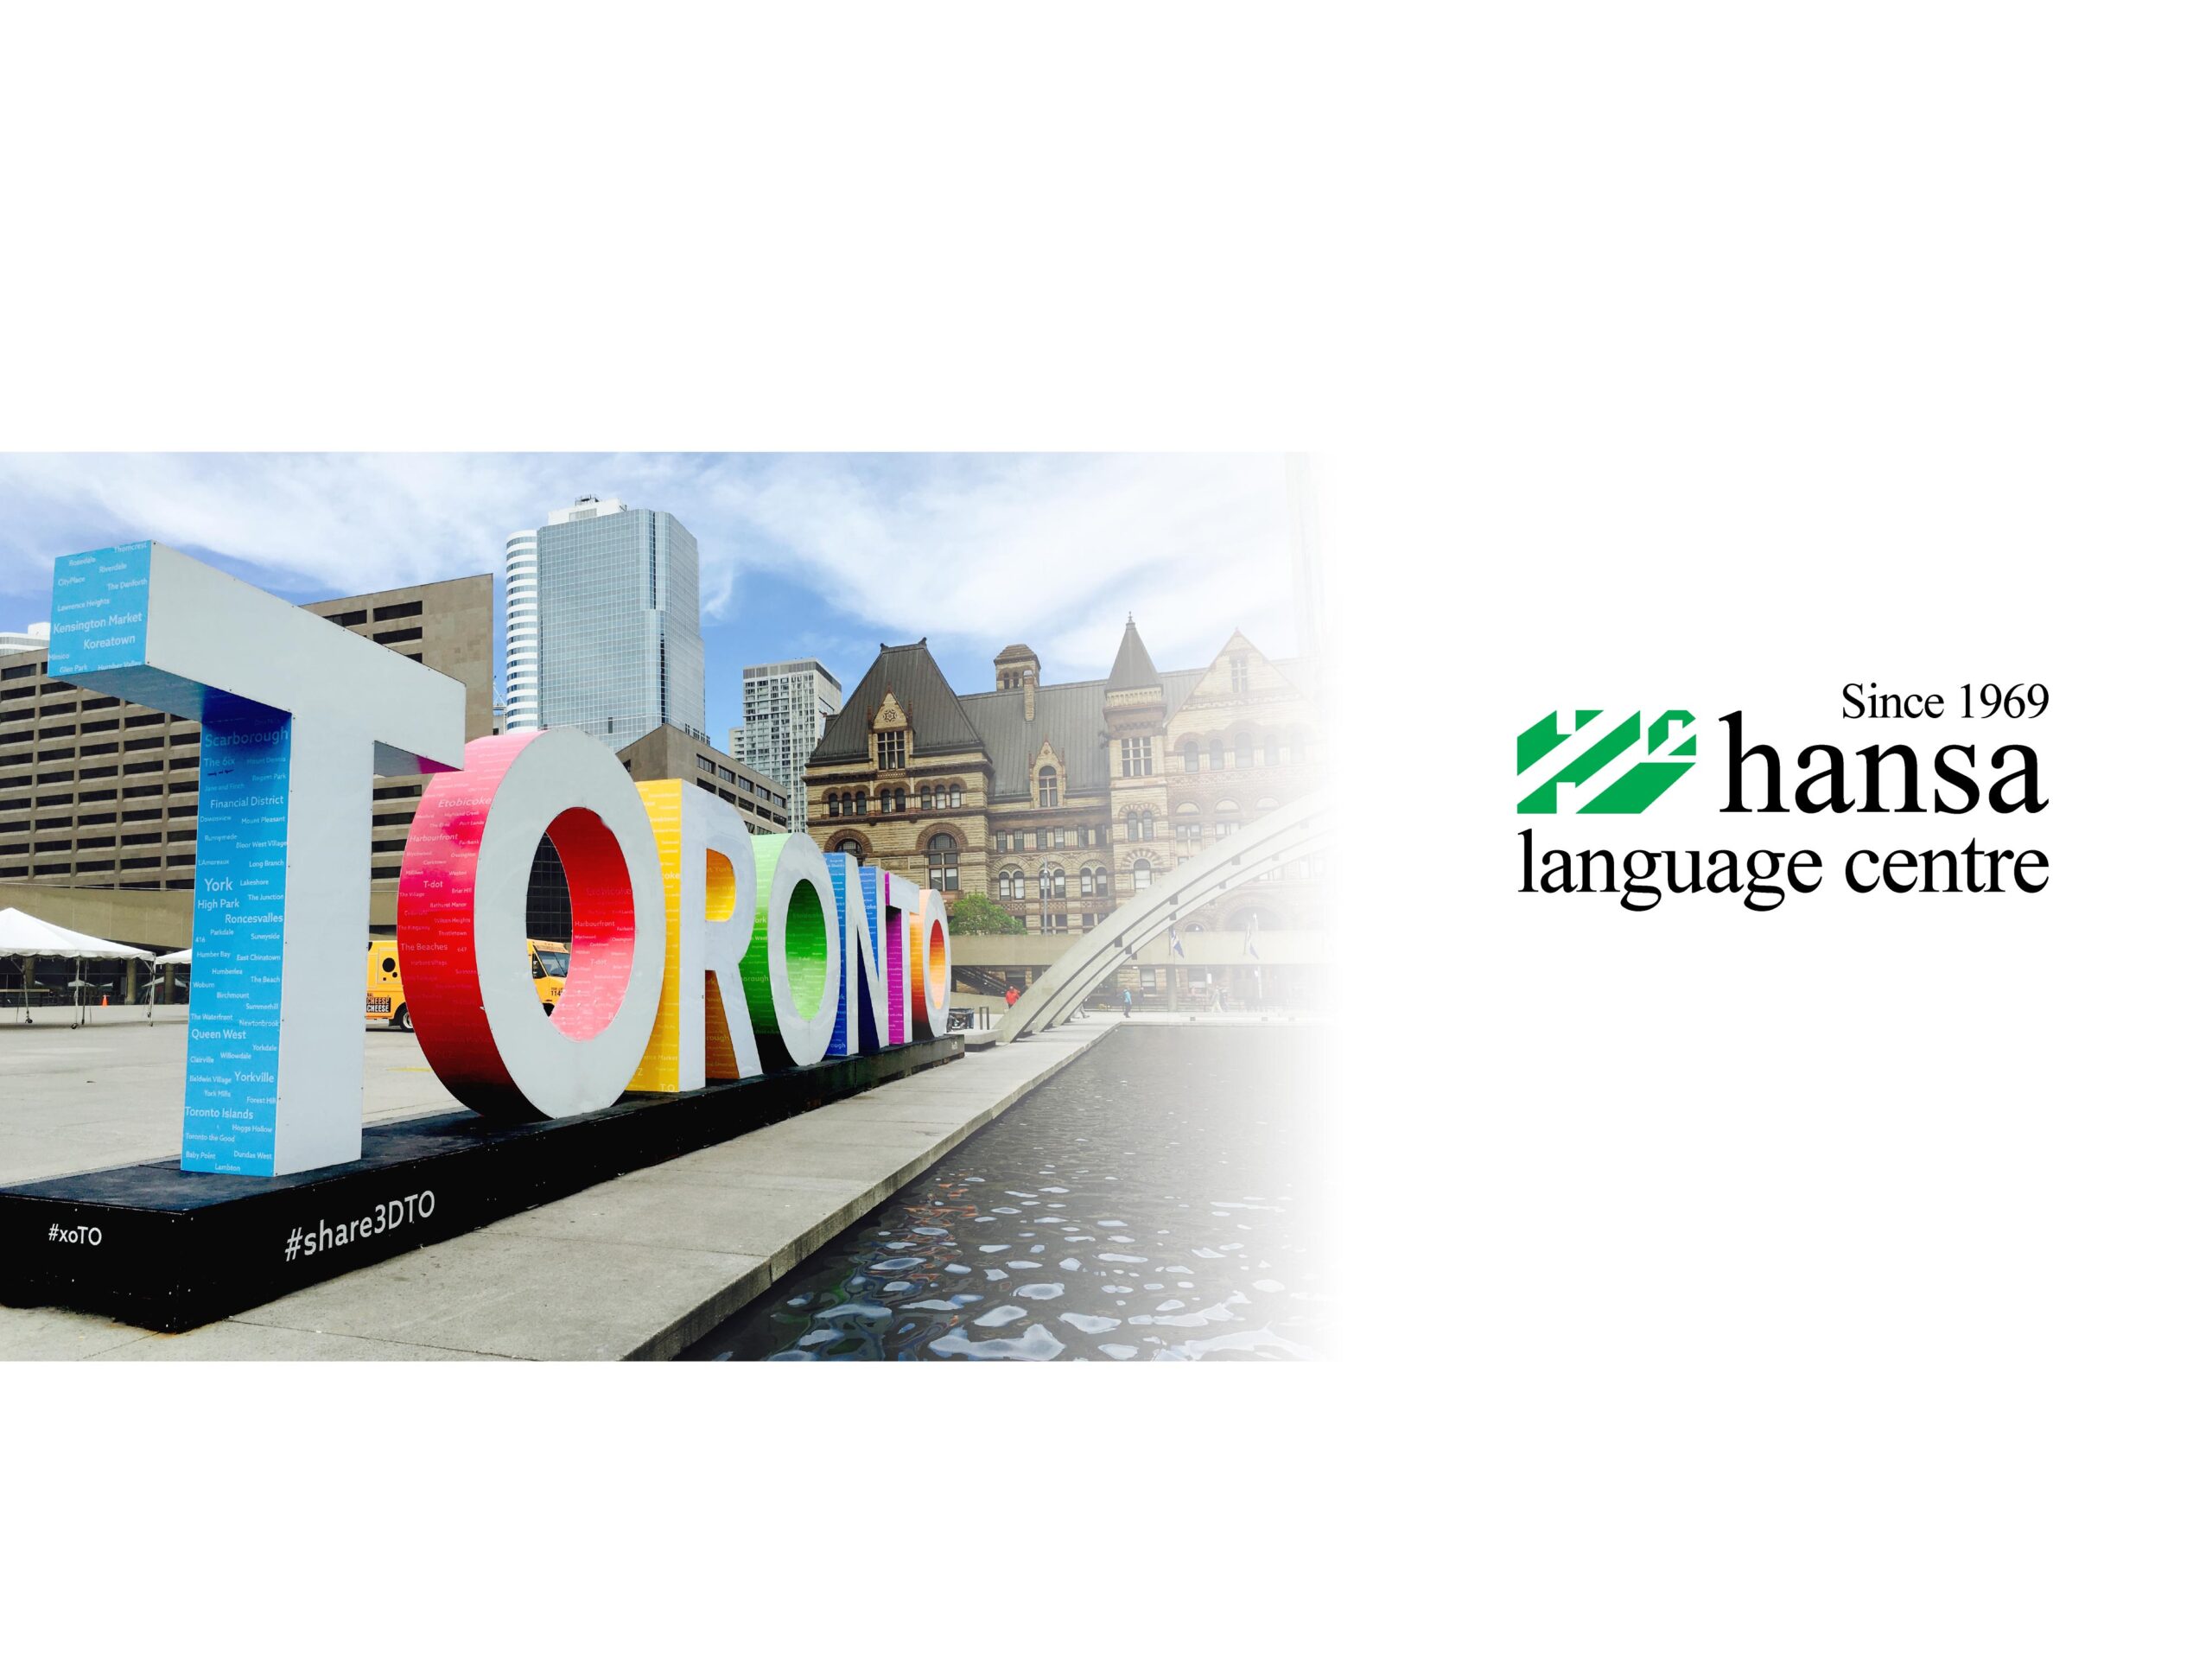 Hansa Language Centre logo & Toronto sign in front of the City Hall